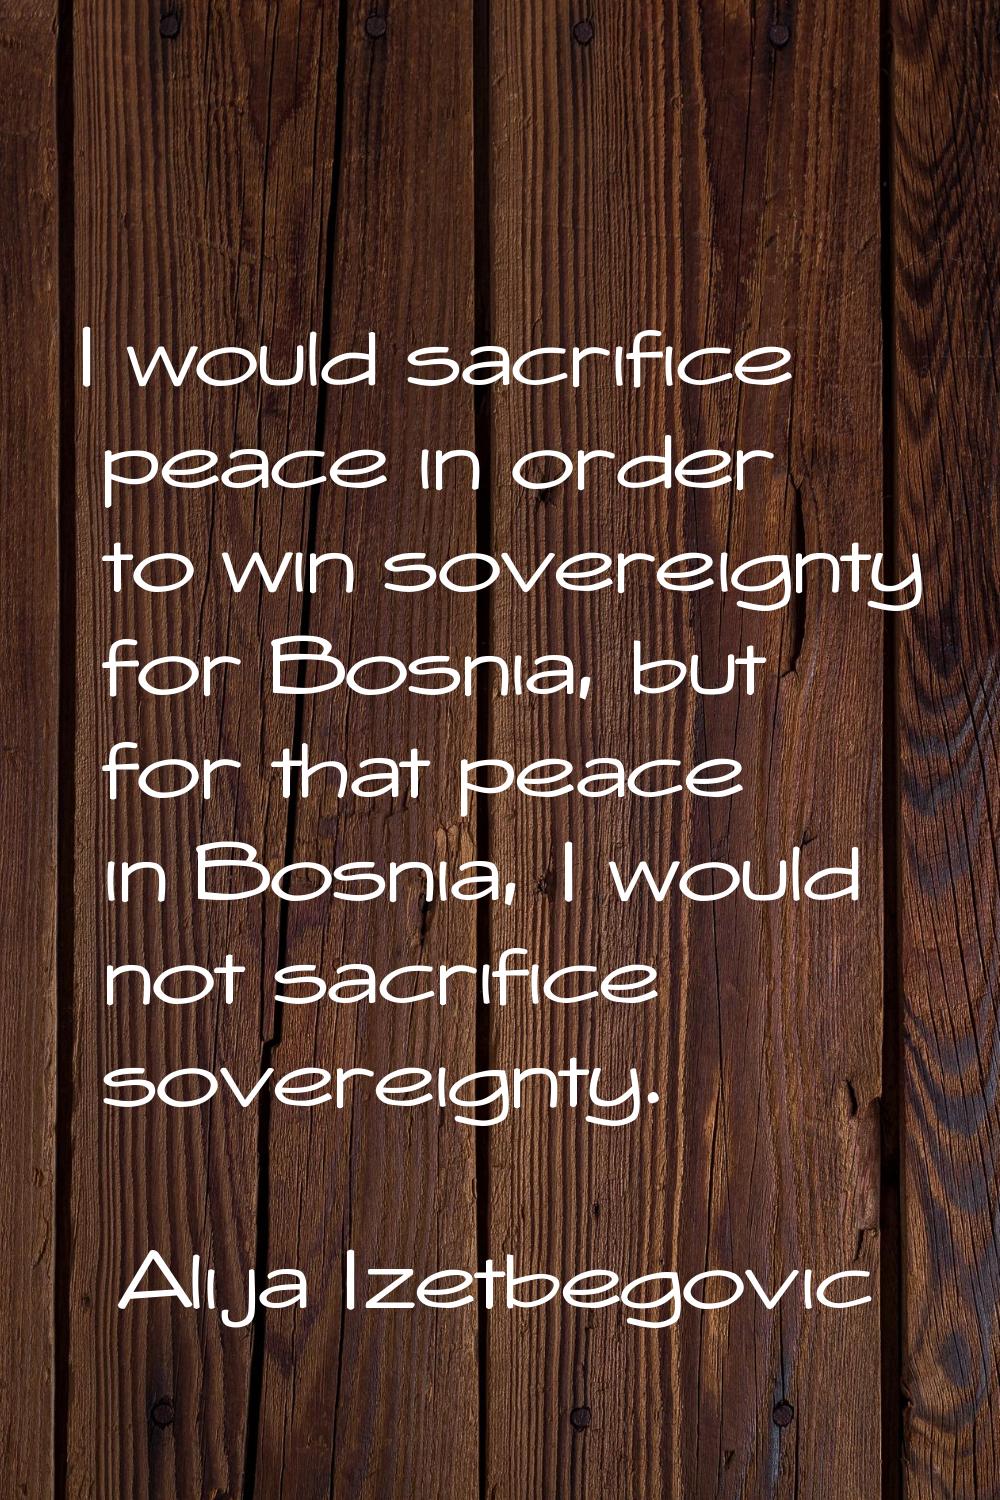 I would sacrifice peace in order to win sovereignty for Bosnia, but for that peace in Bosnia, I wou